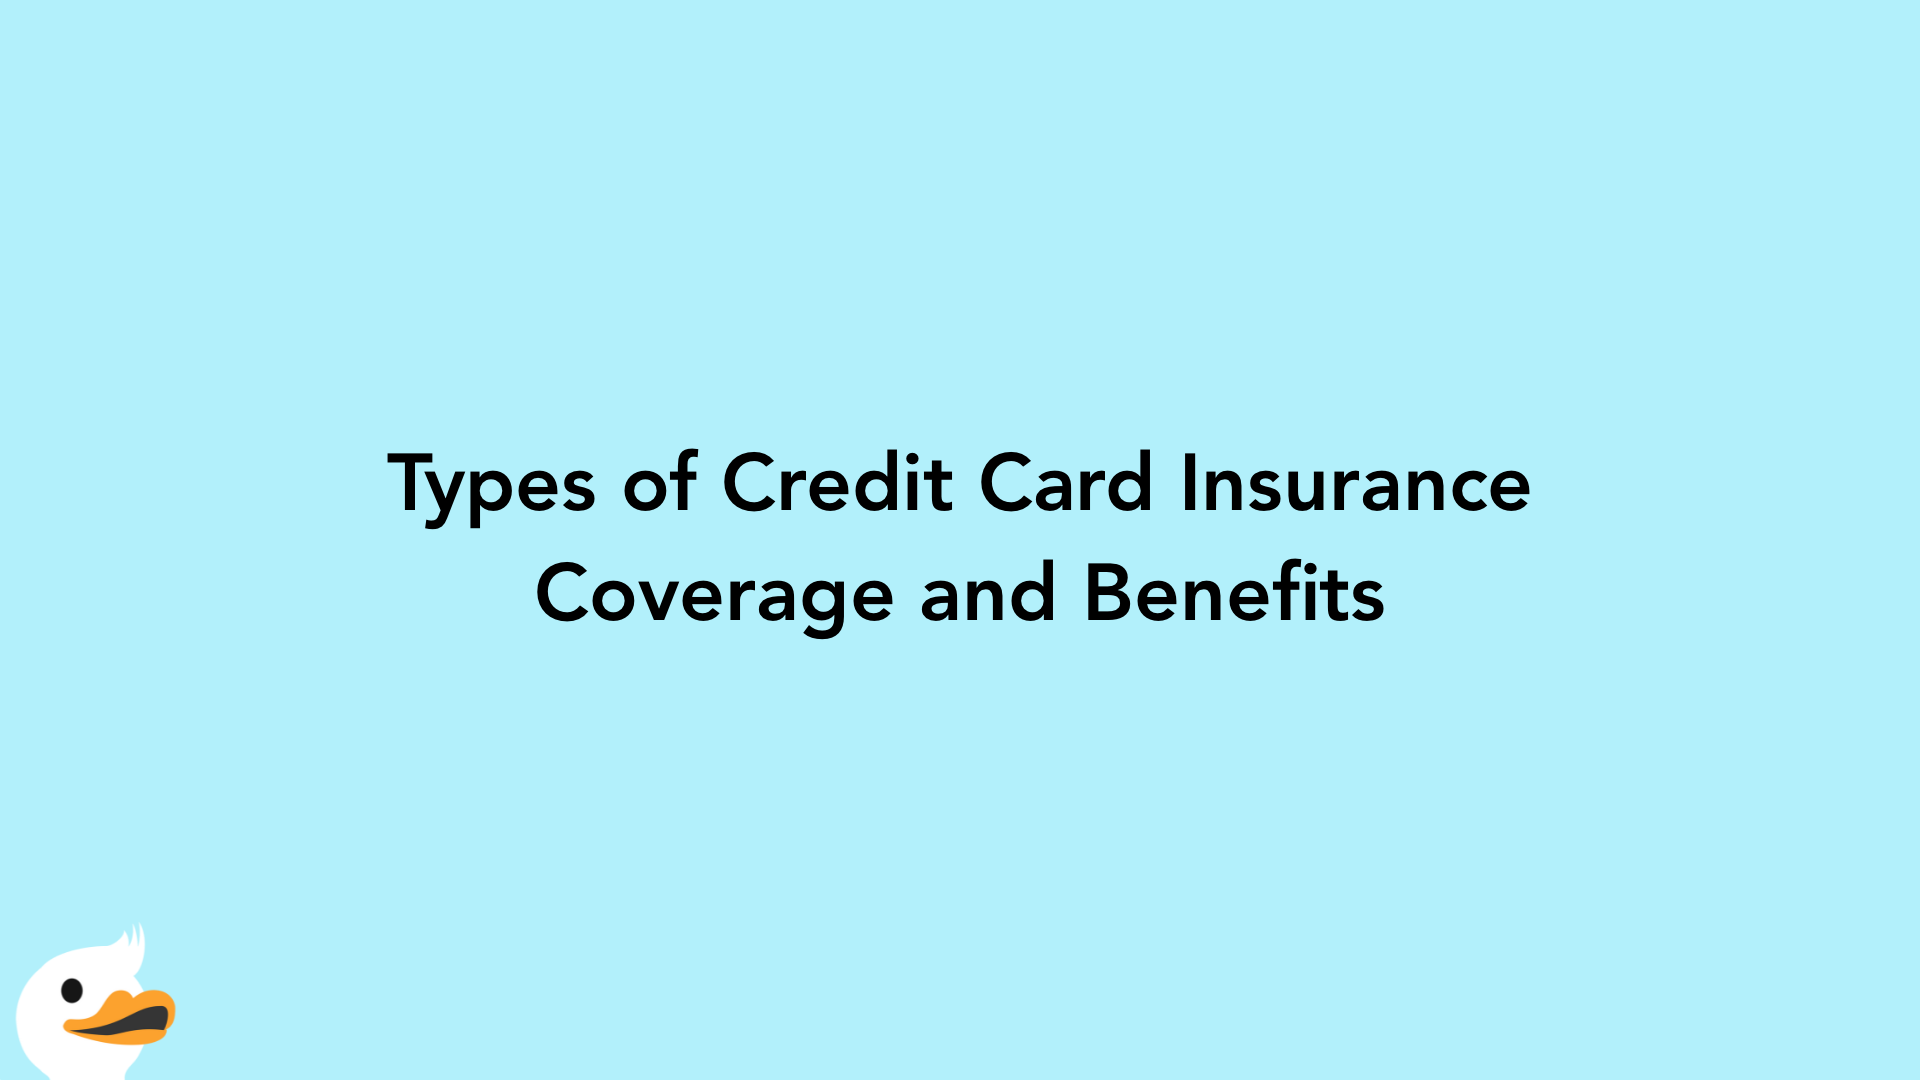 Types of Credit Card Insurance Coverage and Benefits